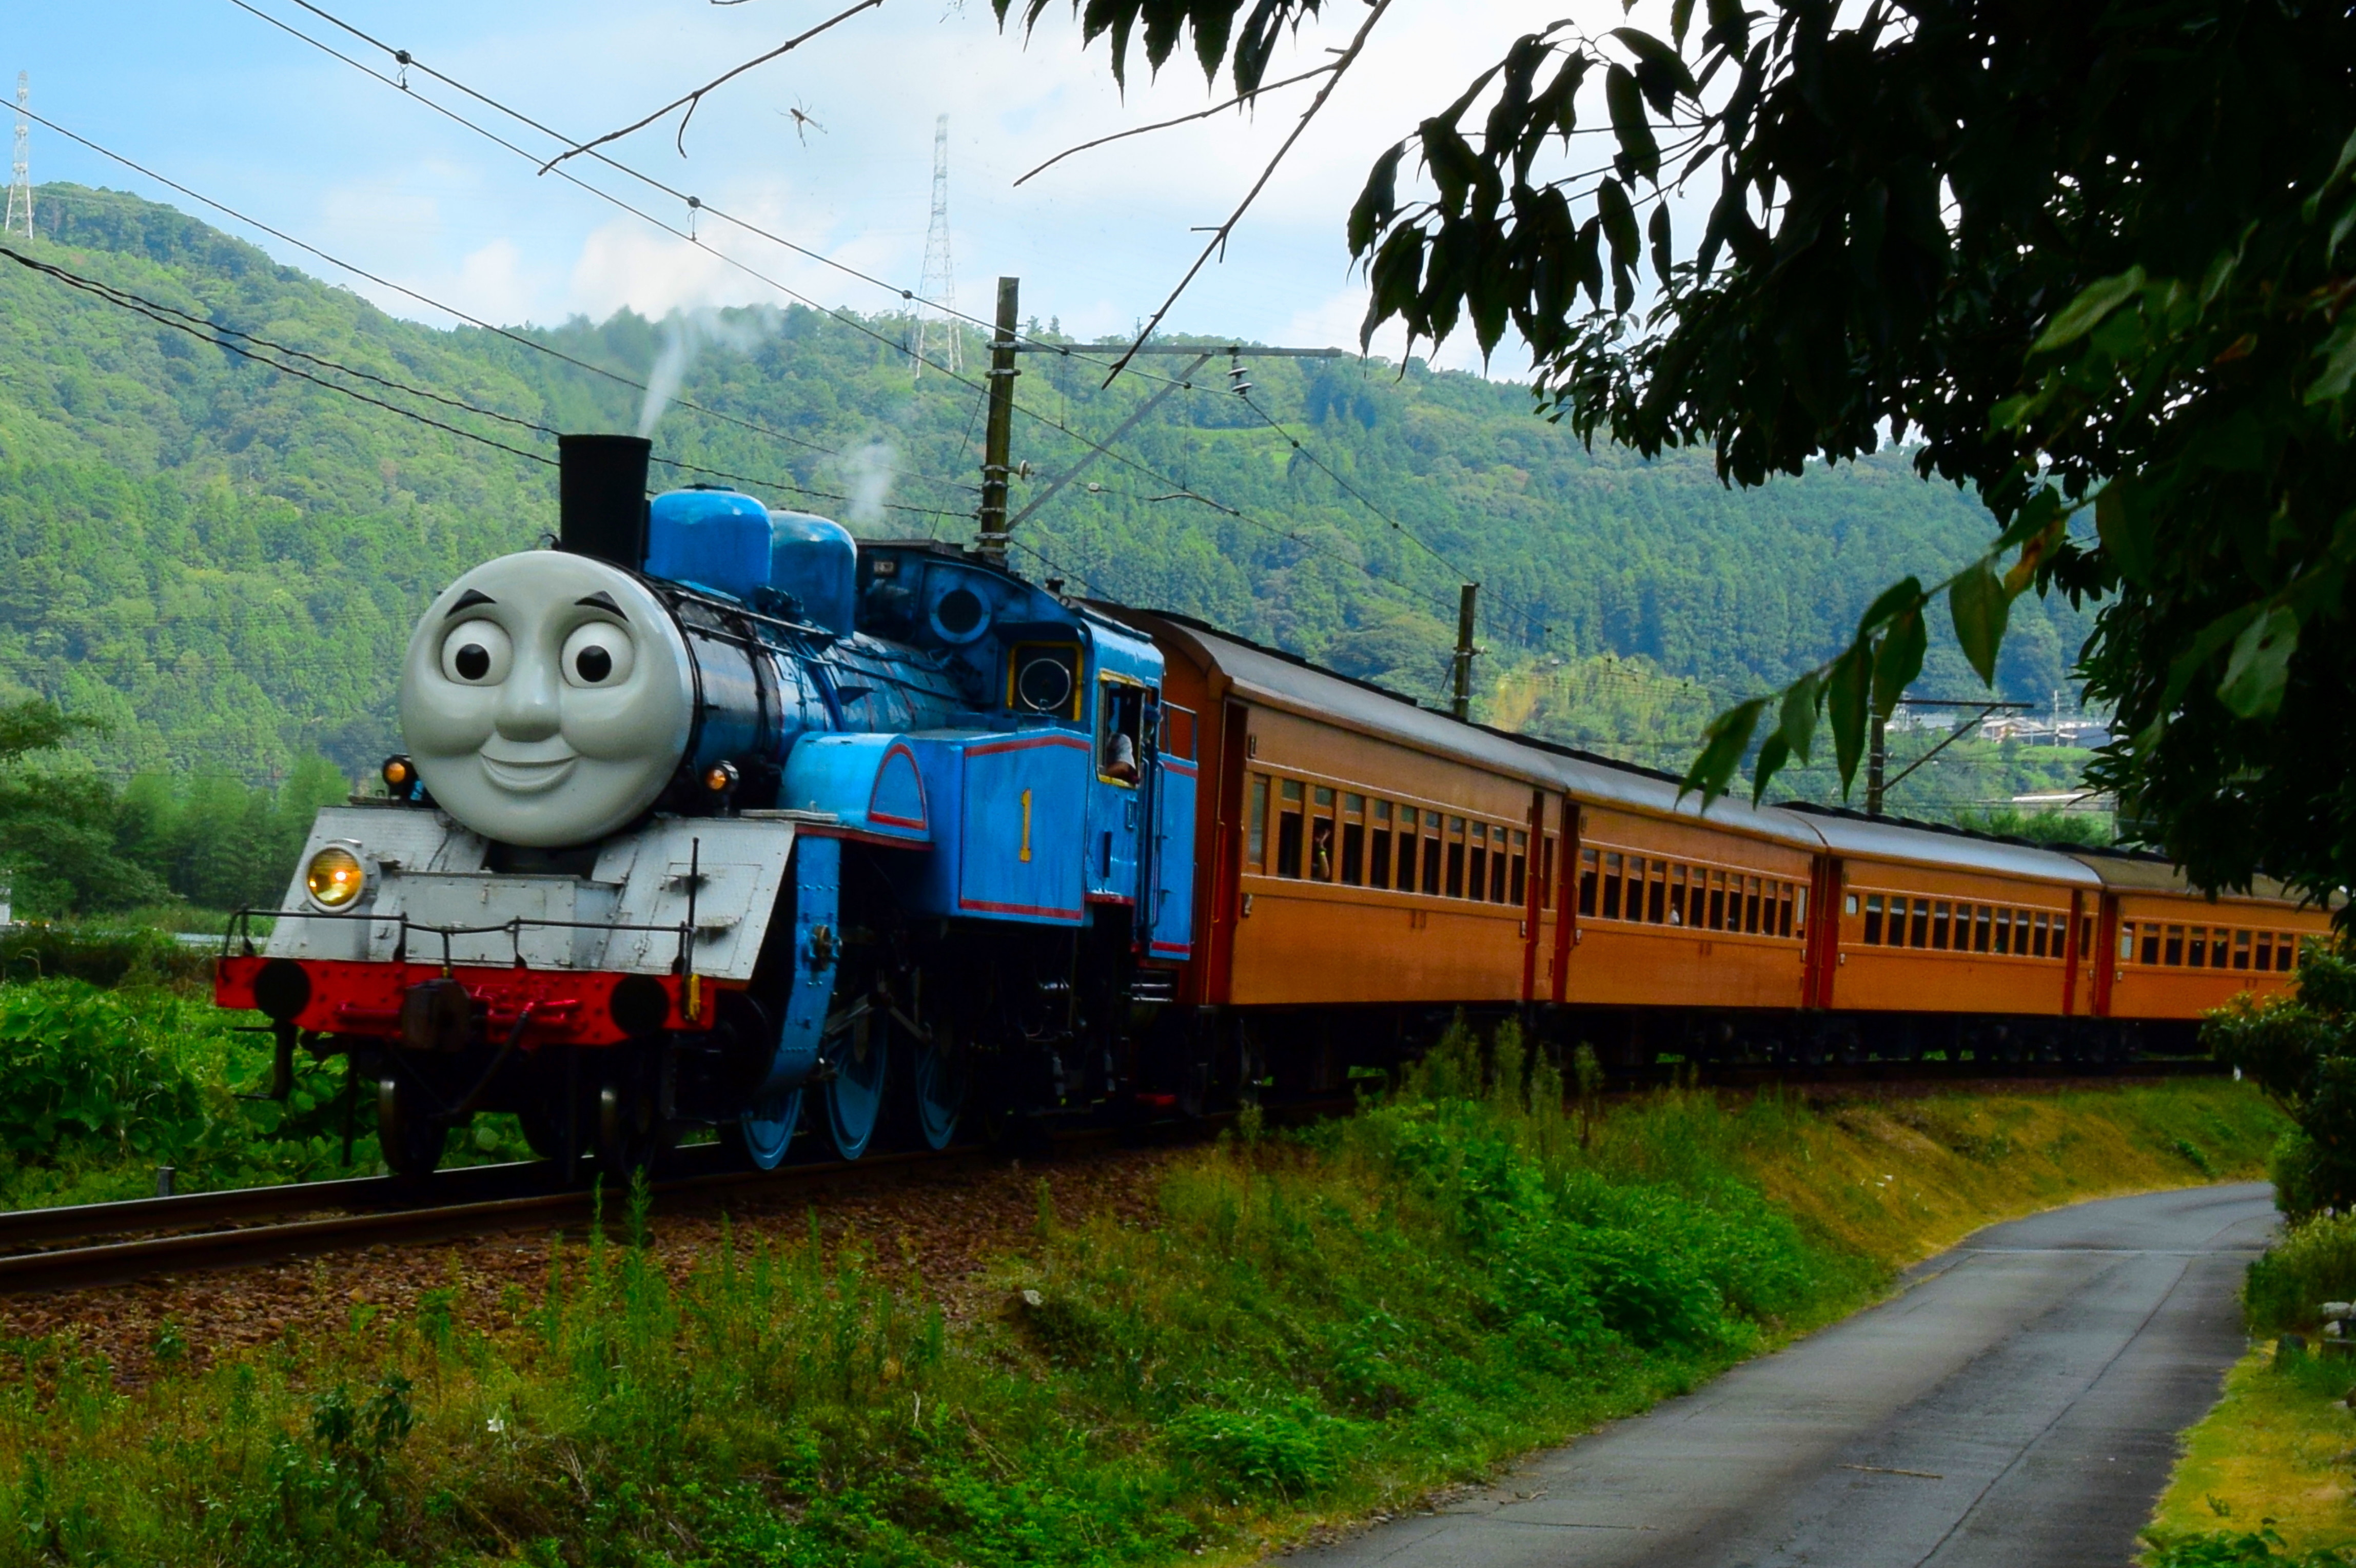 DAY OUT WITH THOMAS(TM) 2022 冬の特別運転　
実施内容の変更について